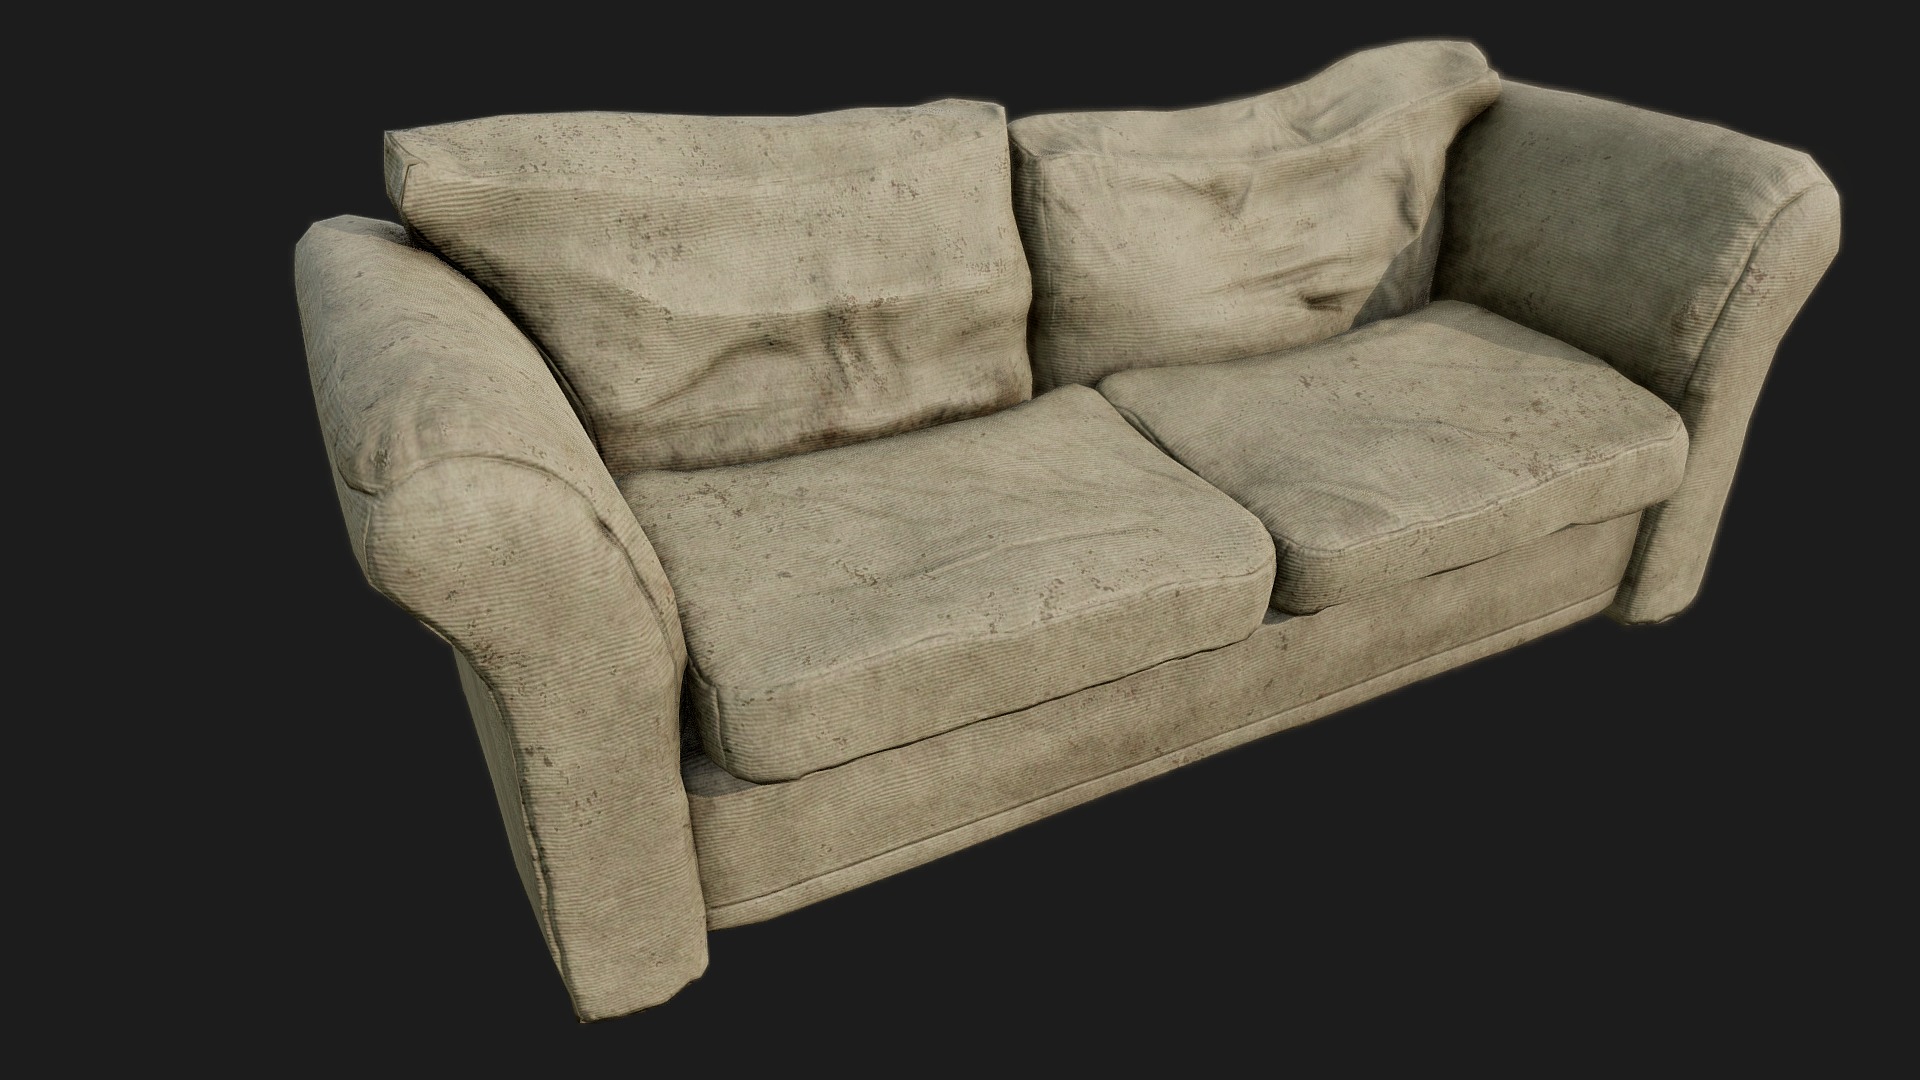 3D model Old Dirty Couch PBR - This is a 3D model of the Old Dirty Couch PBR. The 3D model is about a group of folded towels.